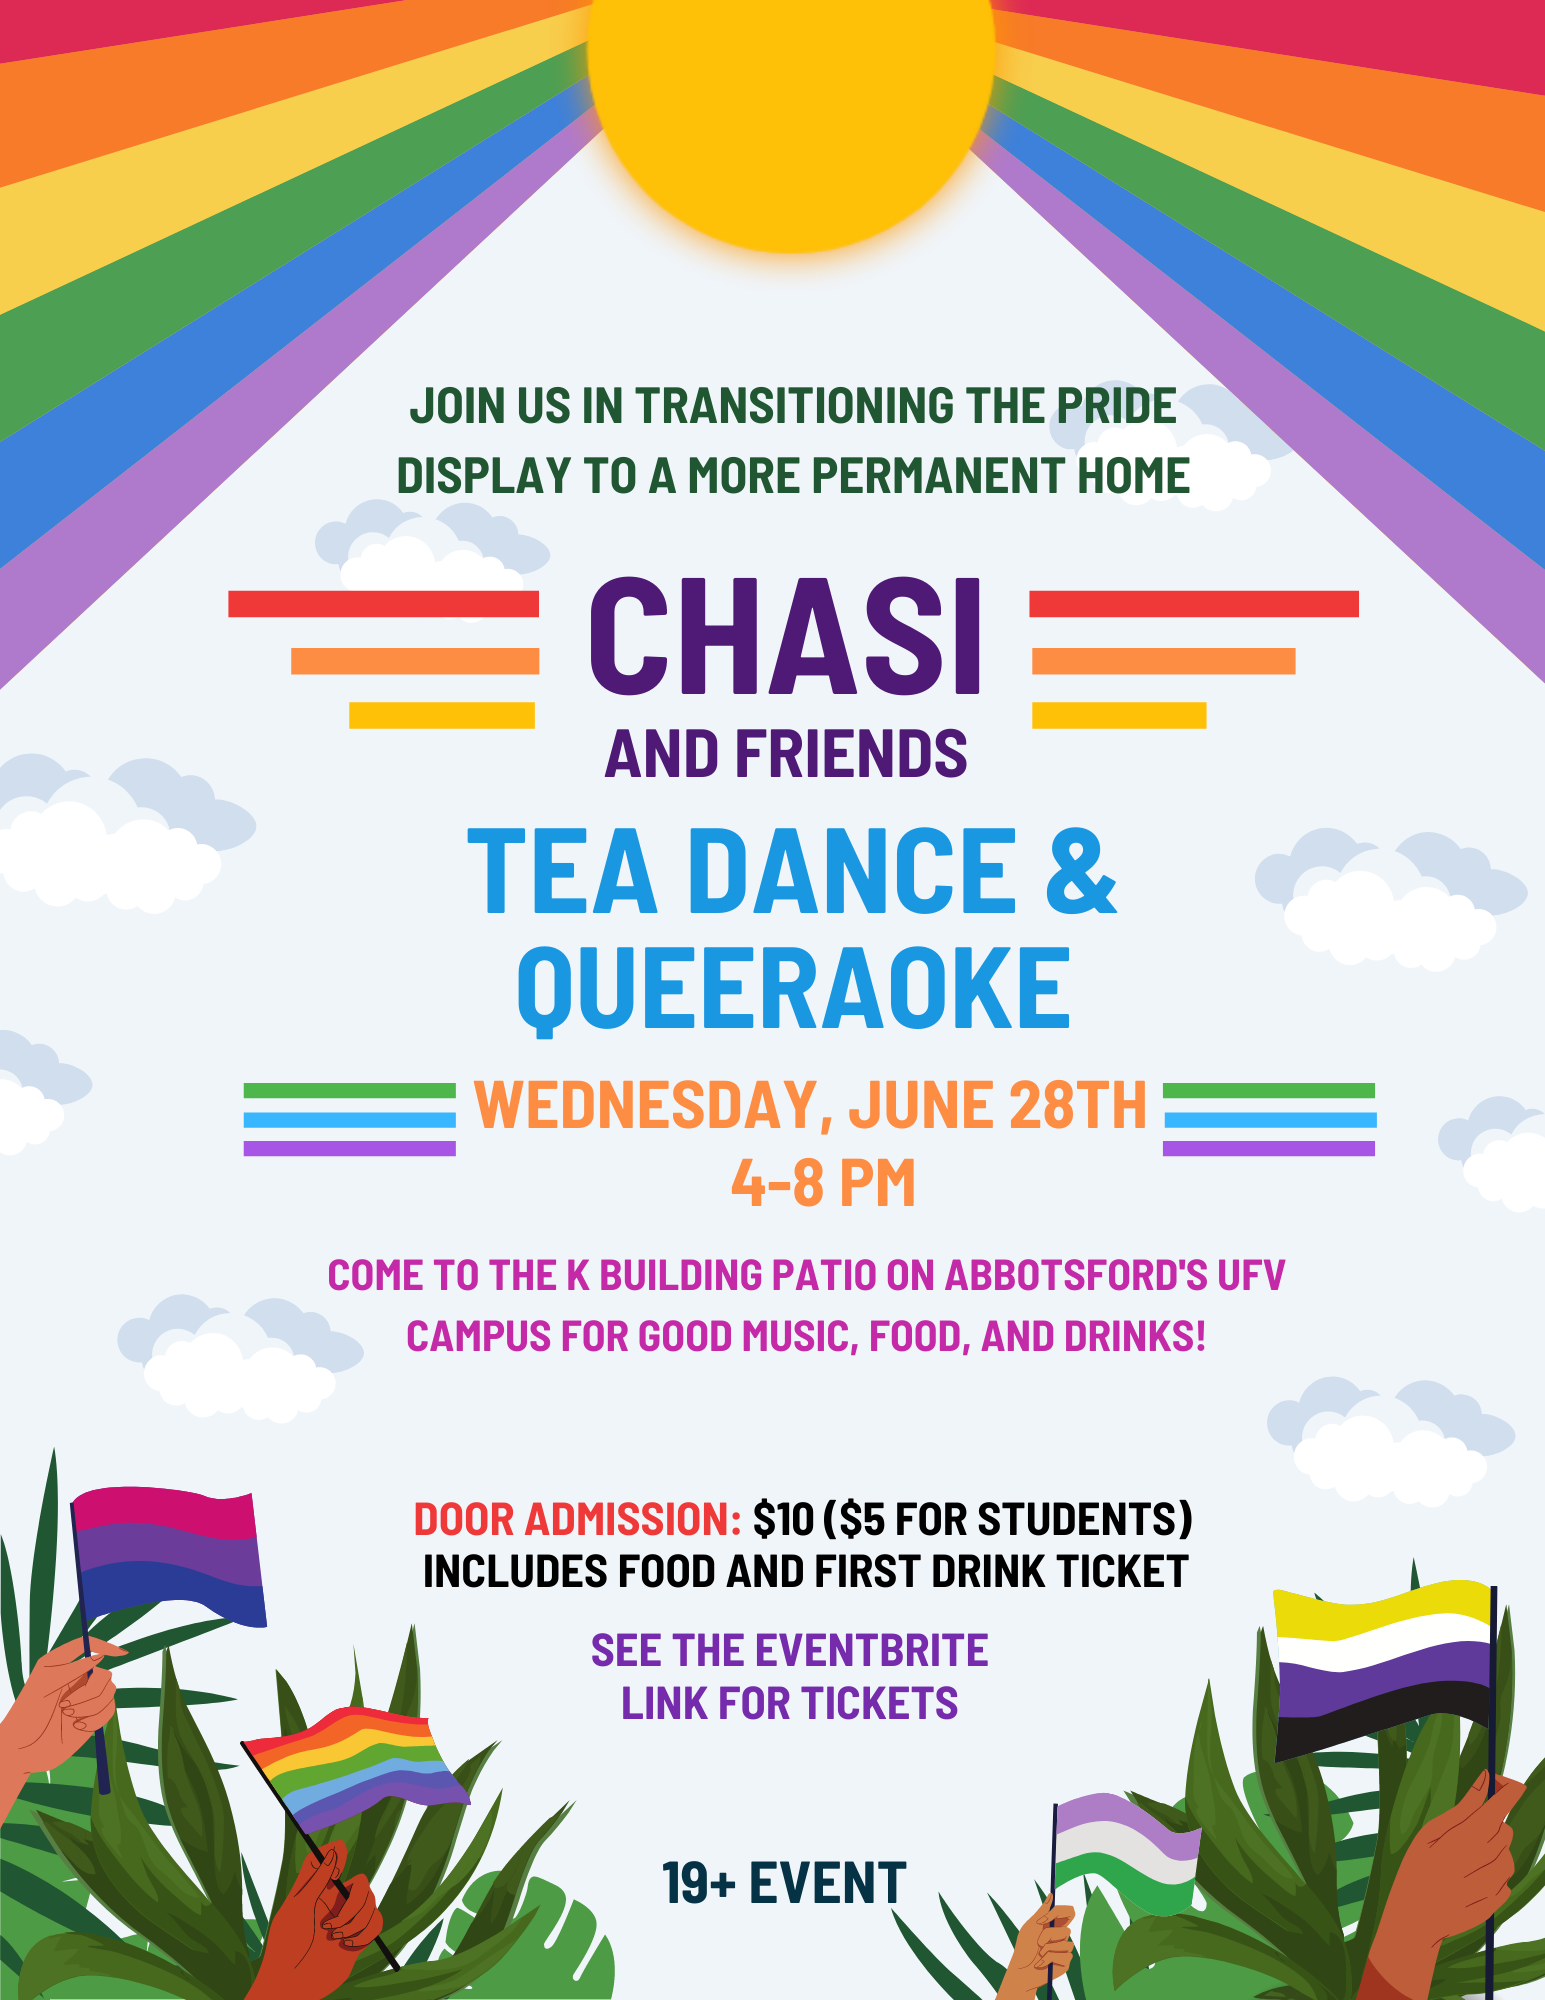 Poster with illustrated hands holding up Pride flags, and a bright cartoon sun above, shining down rainbows. The text reads: "Join us in transitioning the Pride display to a more permanent home. CHASI and Friends Tea dance and Queeraoke, Wednesday, June 28th, 4:00 to 8:00 PM. Come to the K Building Patio on Abbotsford's UFV campus for good music, food, and drinks! Door admission: $10 ($5 for students) includes food and first drink ticket. See the Eventbrite link for tickets. 19+ event."